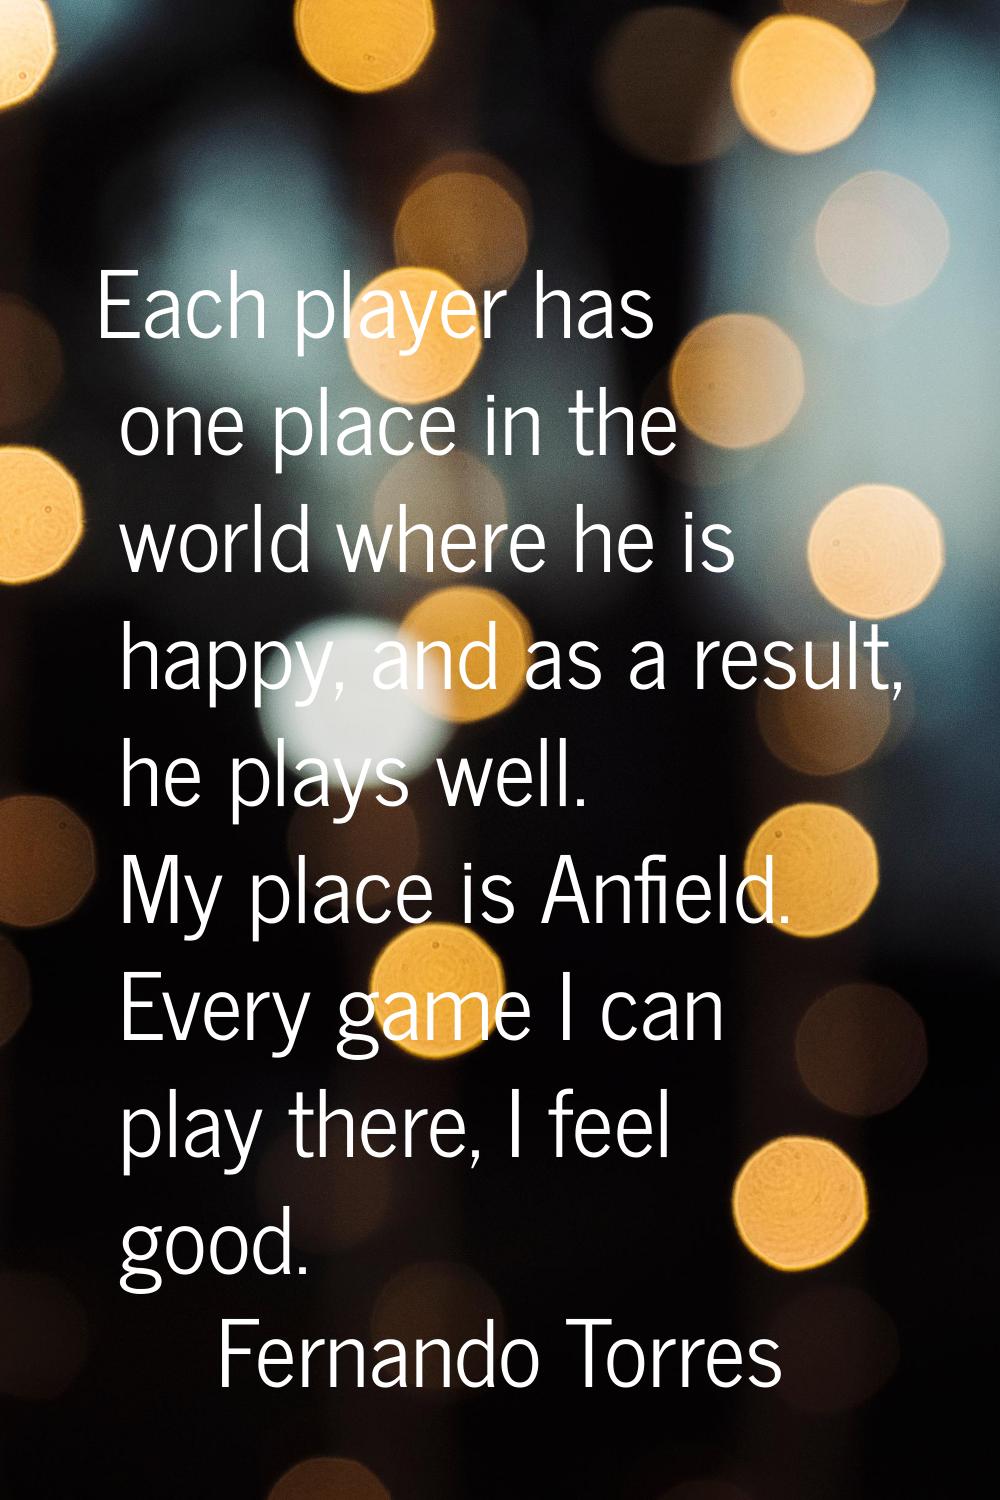 Each player has one place in the world where he is happy, and as a result, he plays well. My place 